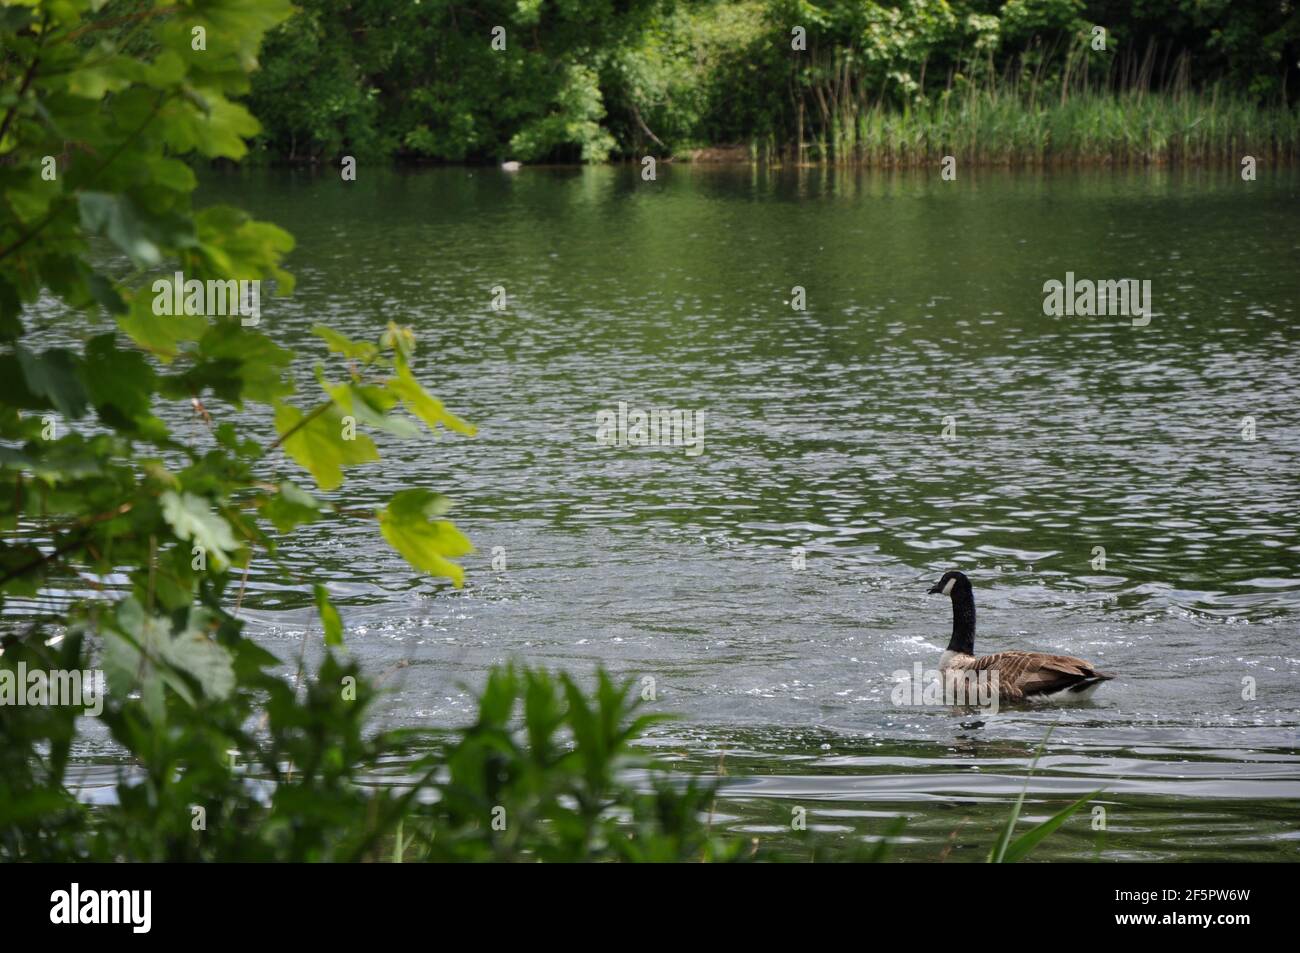 Wildlife at Coate Water Country Park Stock Photo